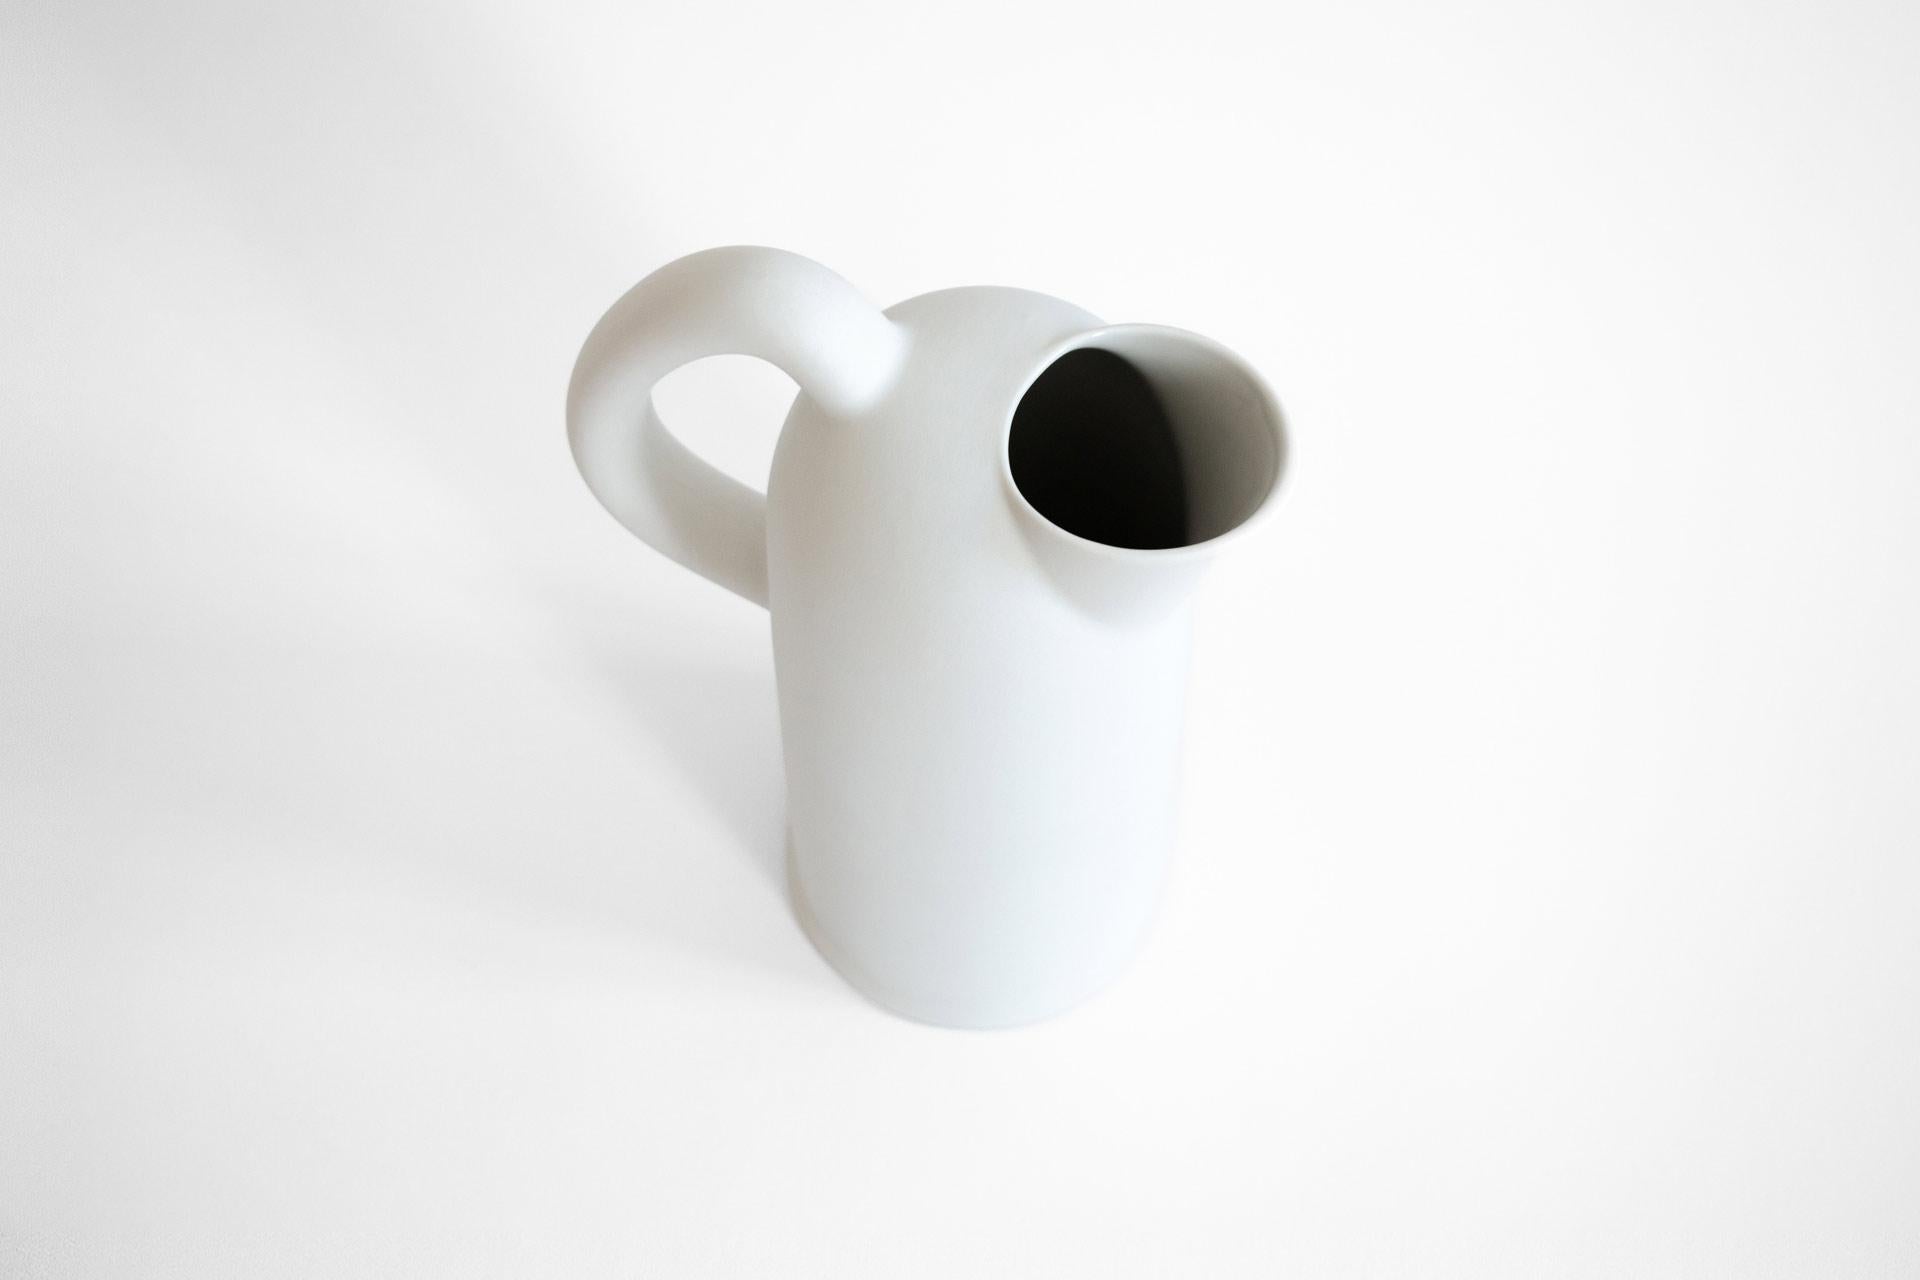 Water jug made of clay that reinterprets the historic typology with an upright profile and ergonomic handle. To encourage the user to consume tap water instead of from plastic bottles, Jug is a beautiful daily use object that never needs to be